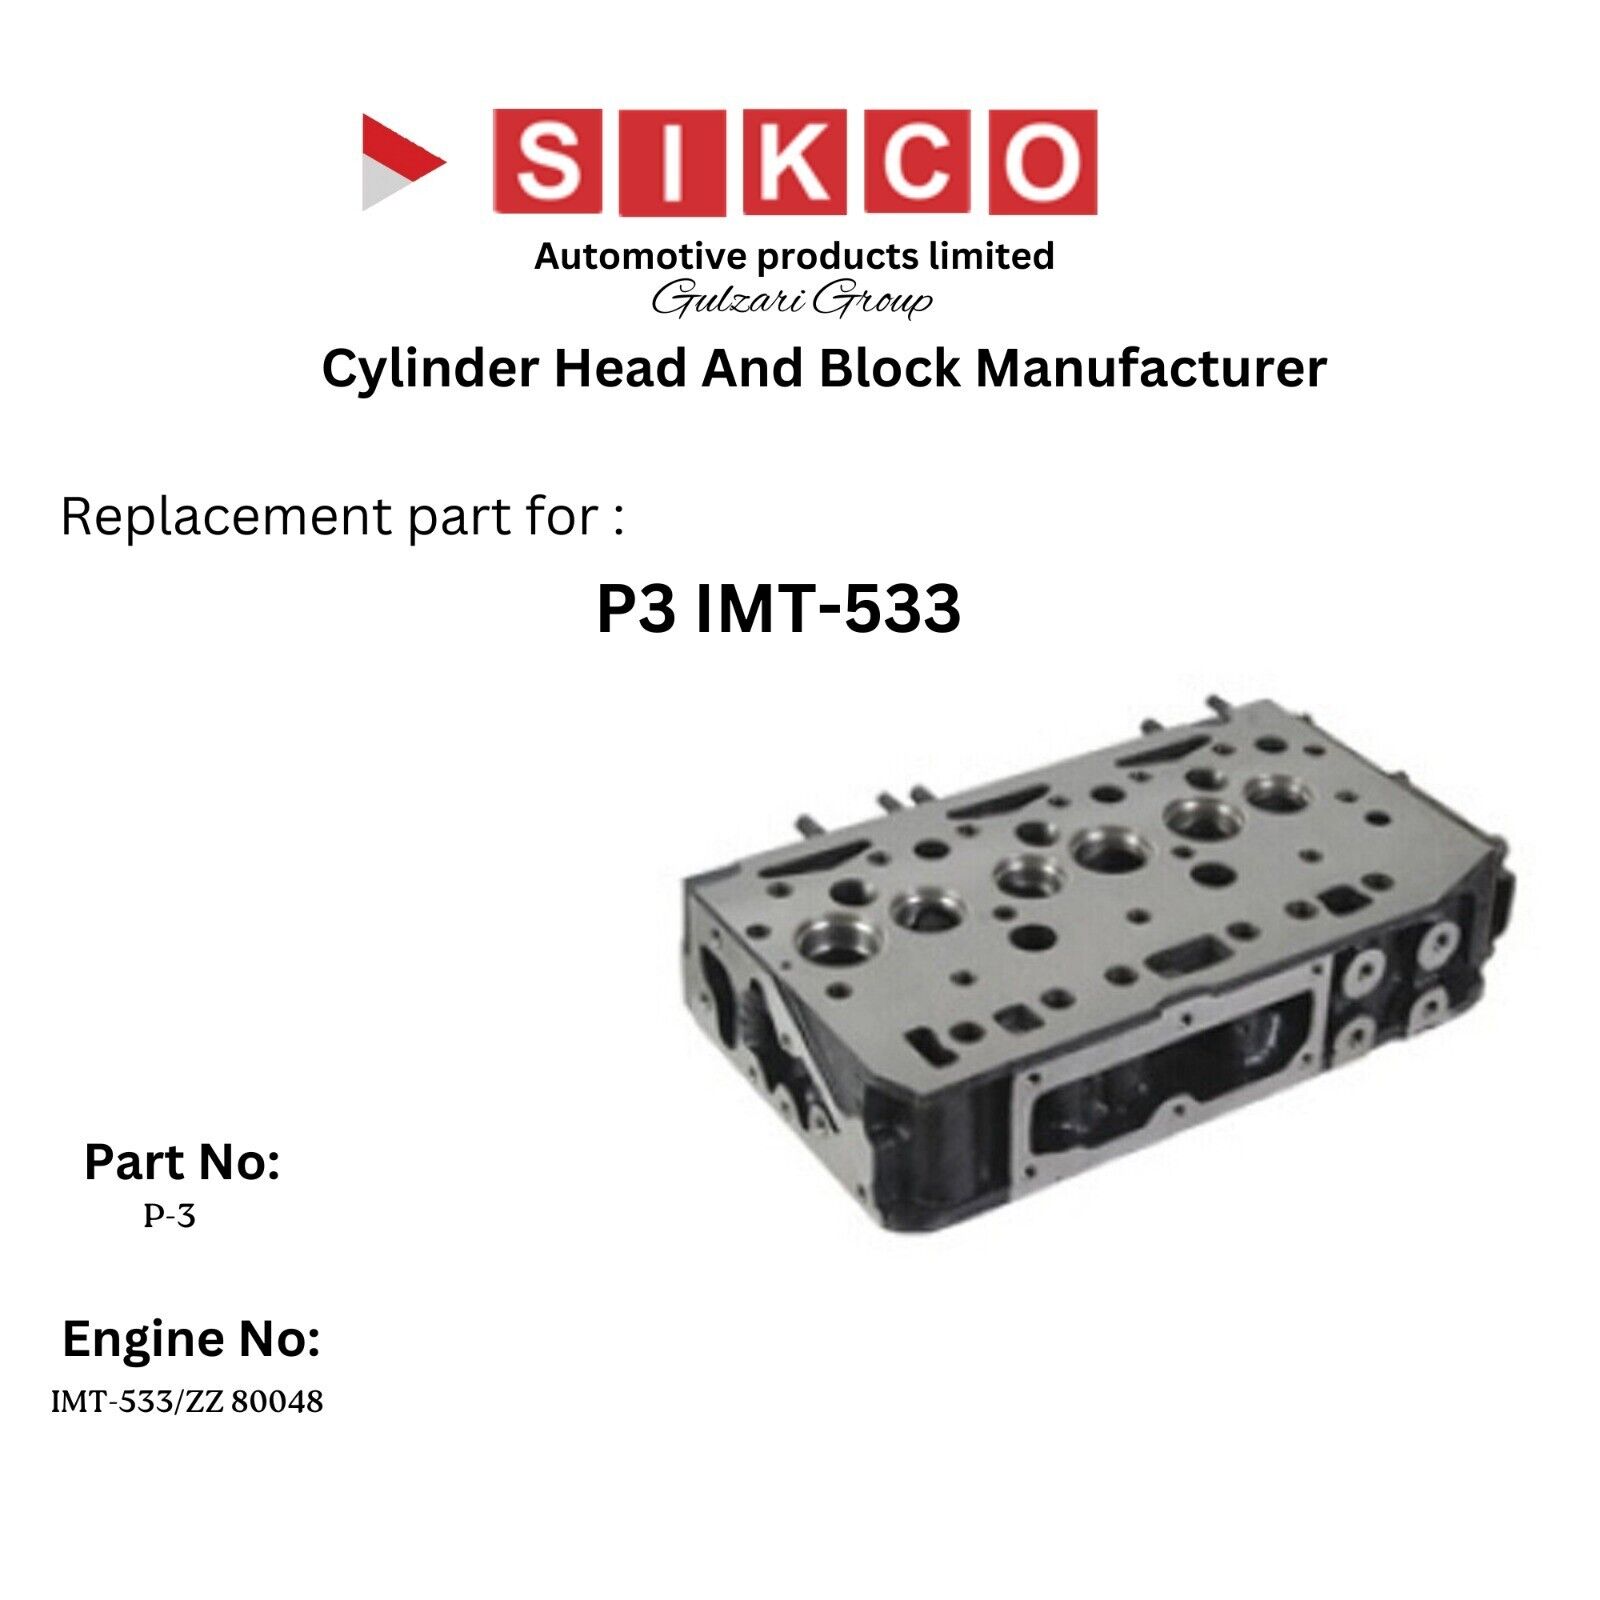 Cylinder Head For P3 IMT-533